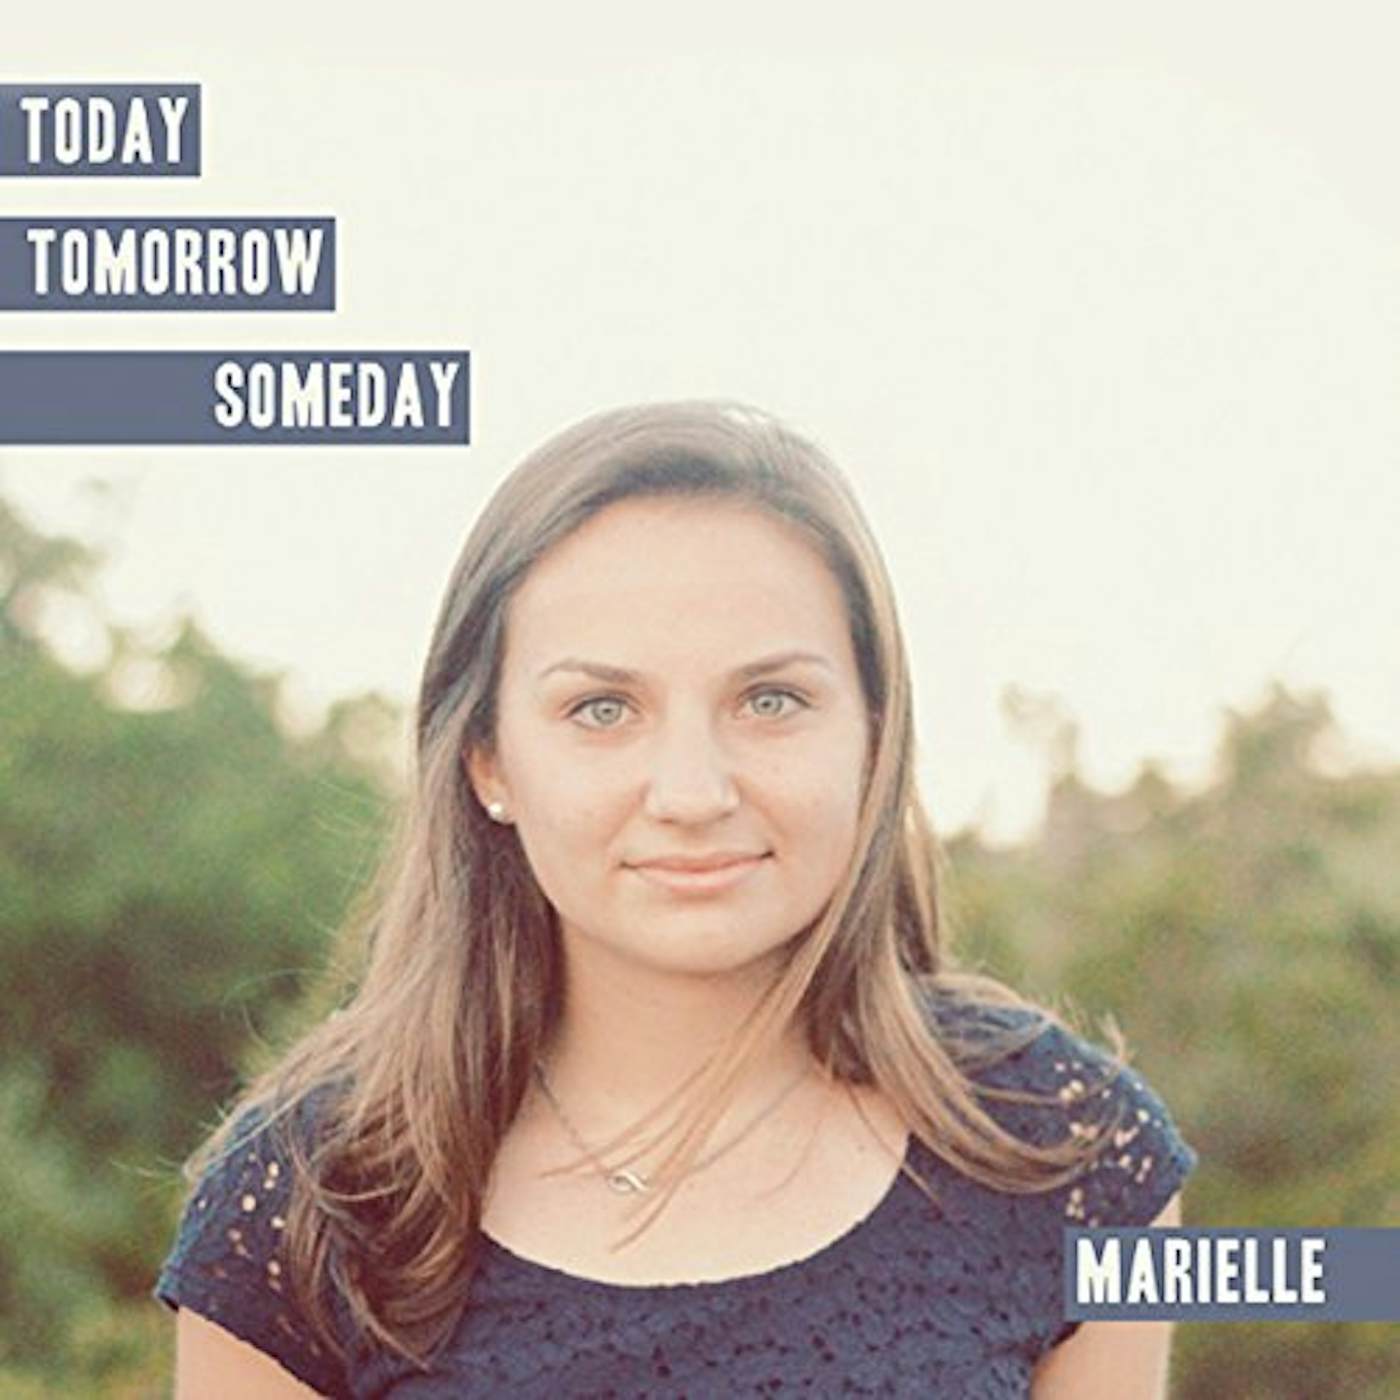 MariElle TODAY TOMORROW SOMEDAY EP CD